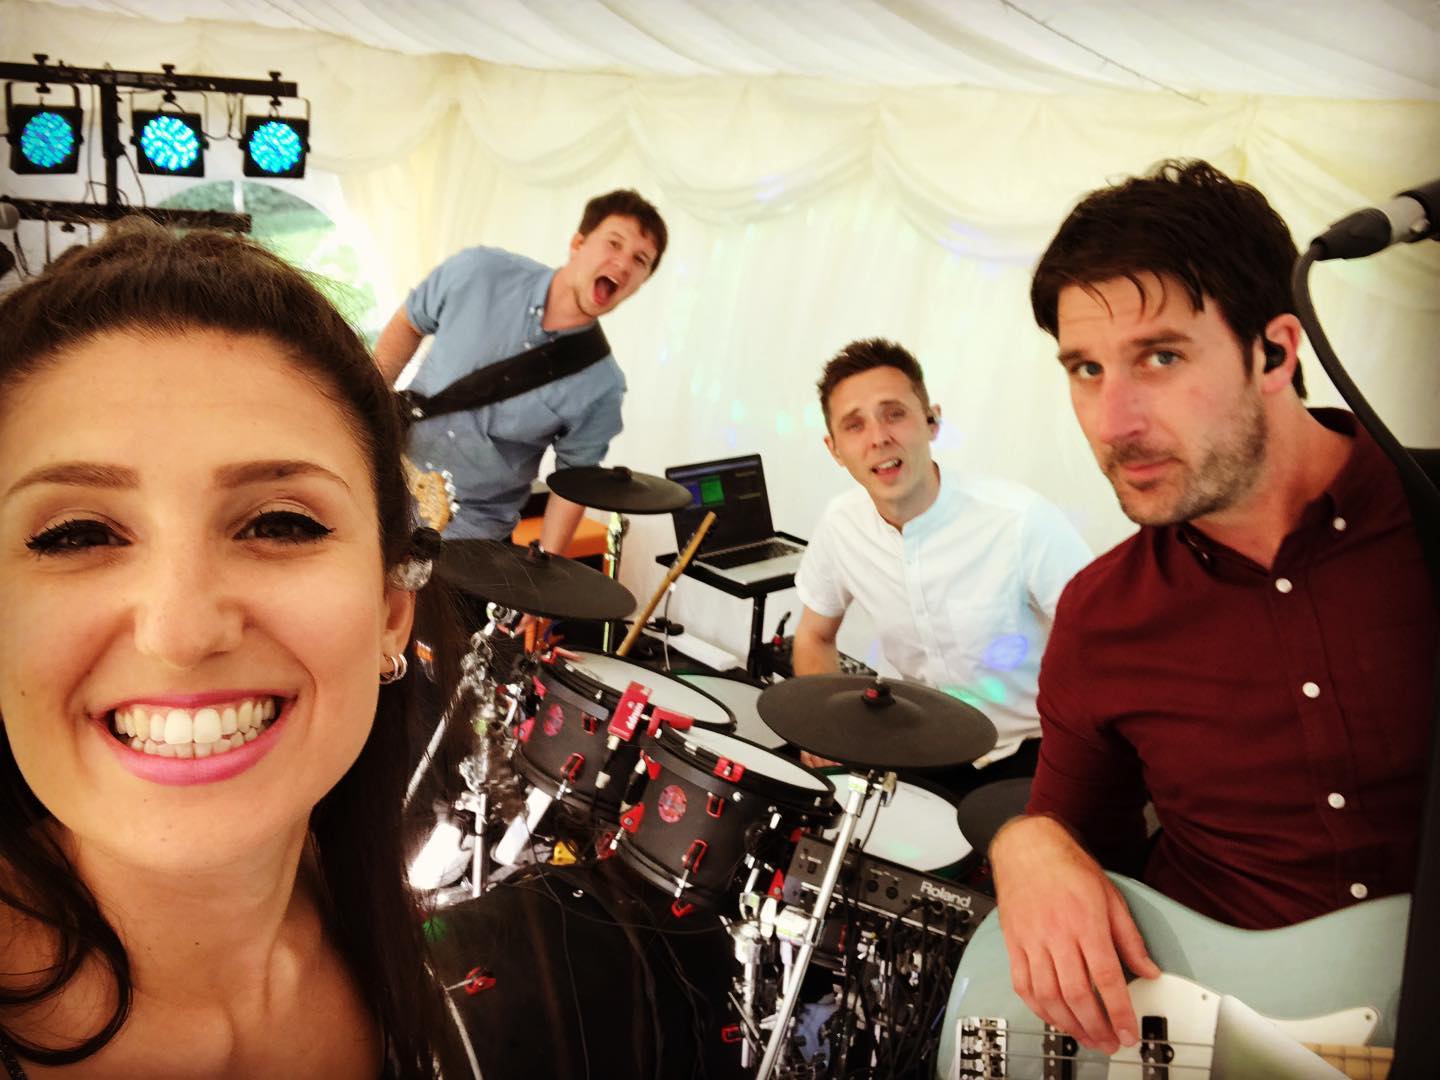 Hire a party band Kent